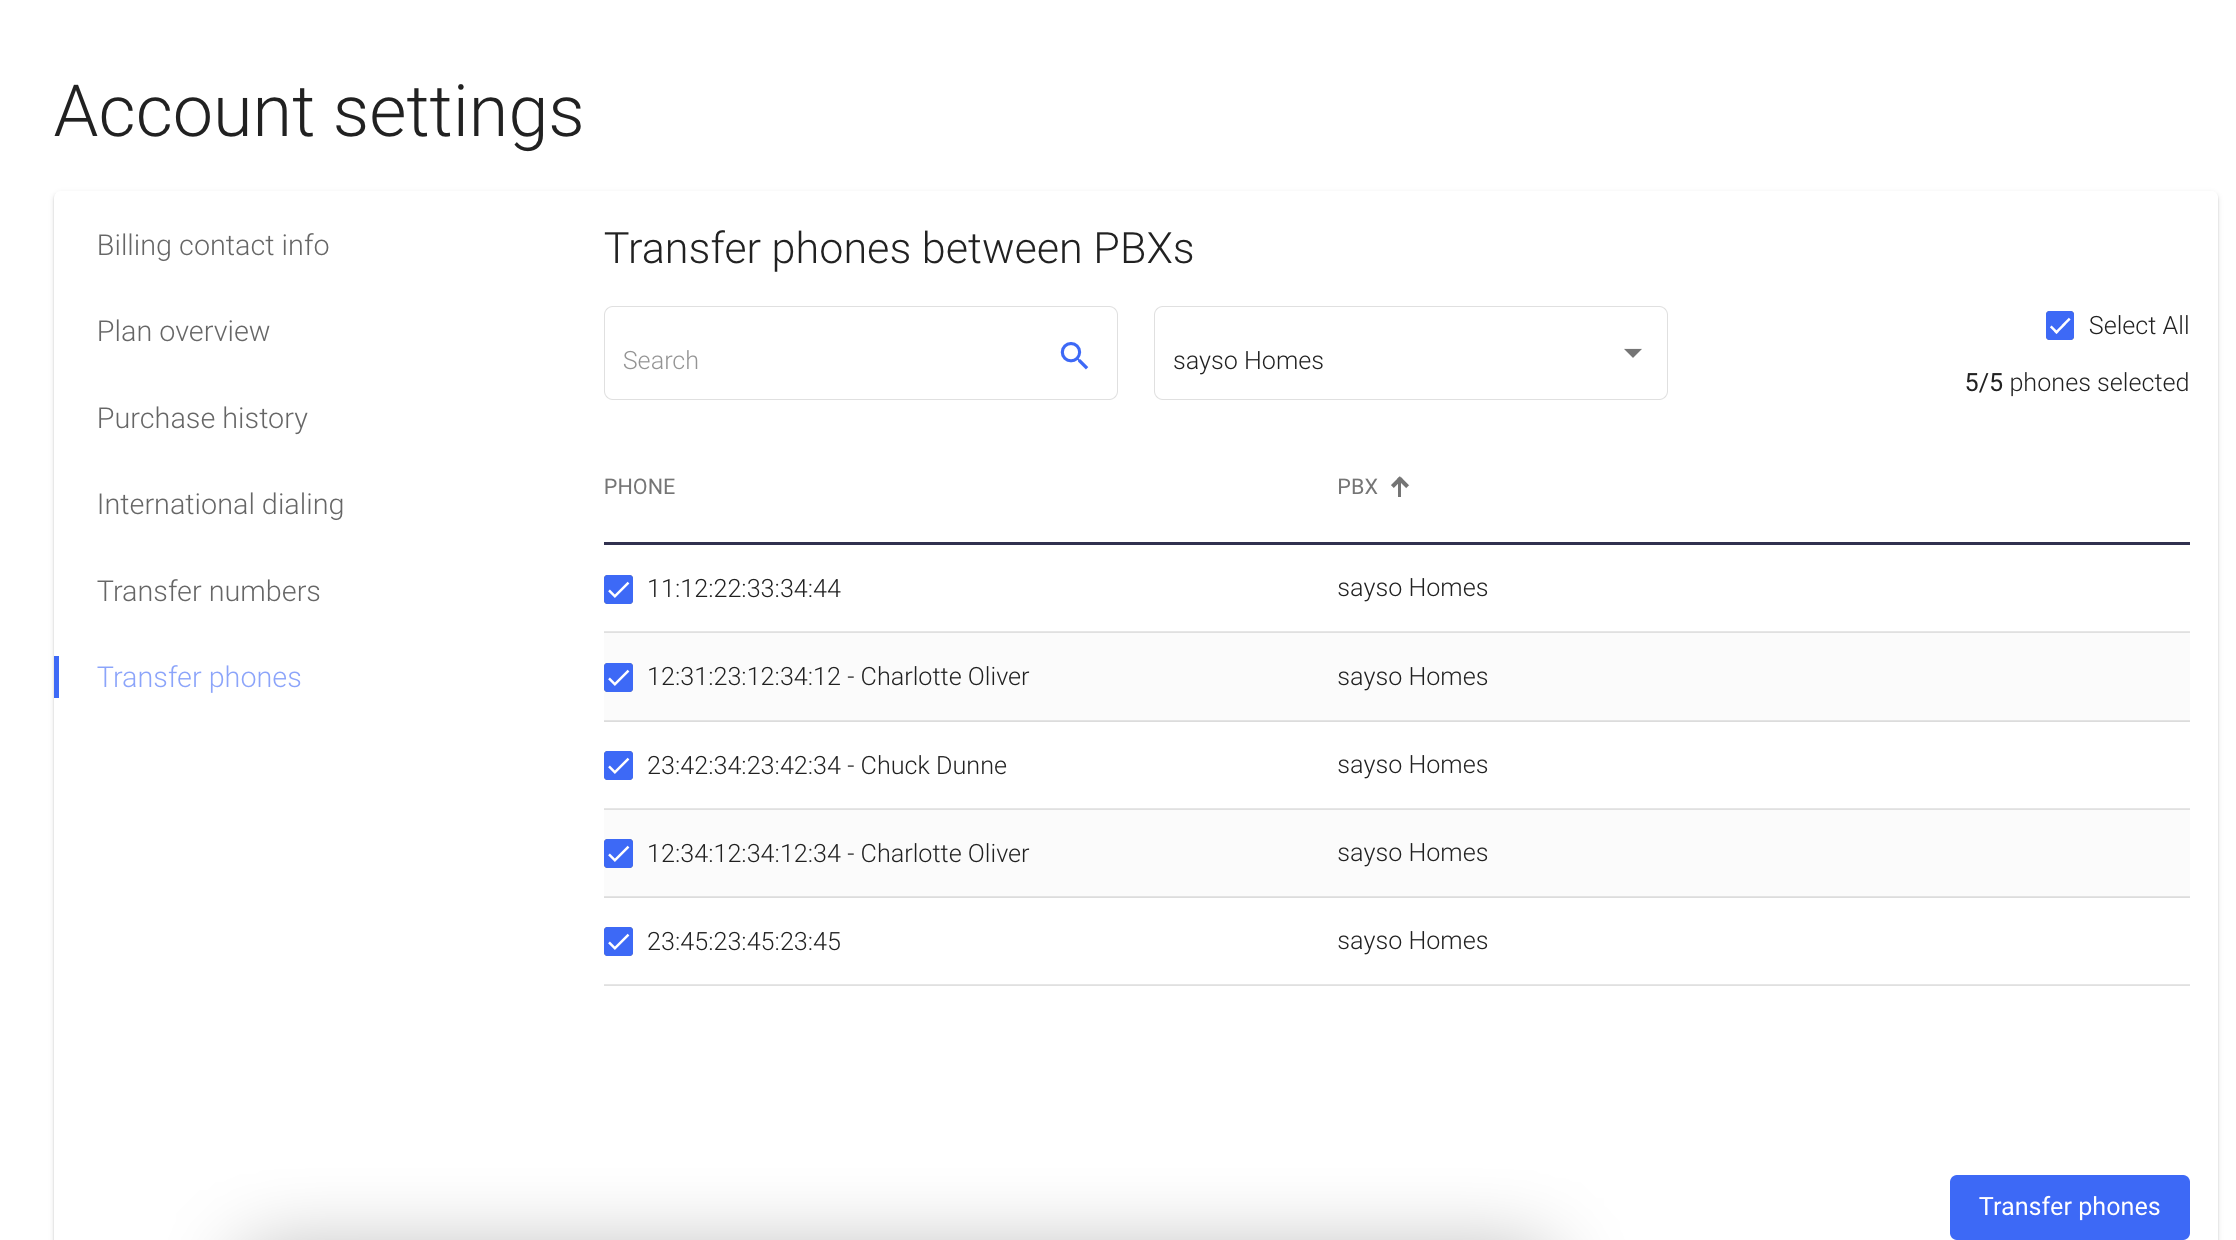 Screenshot of the transfer phones feature in the OnSIP web app.